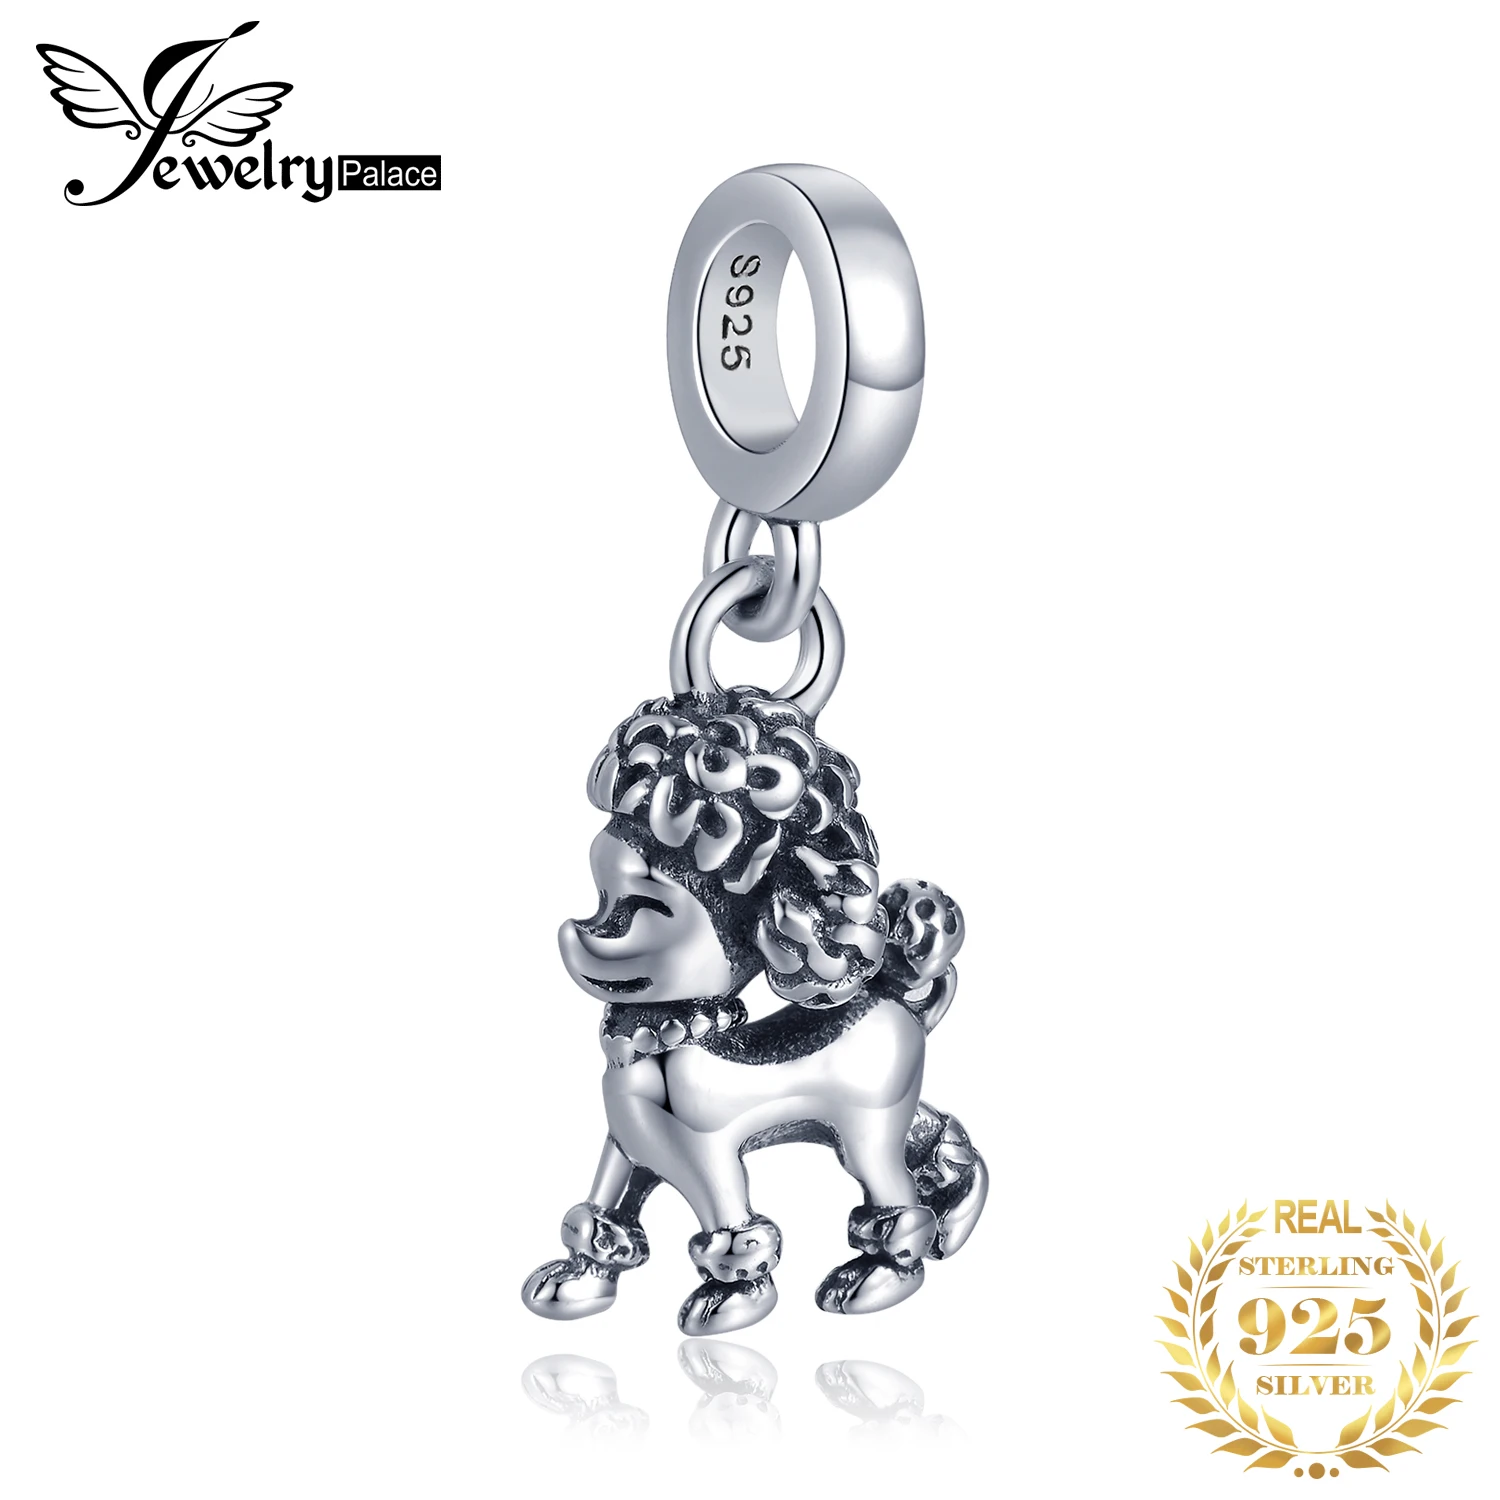 JewelryPalace 925 Sterling Silver Dog Lover Poodle Pendant Silver poodle charm charm bracelets for women Not Include A Chainb